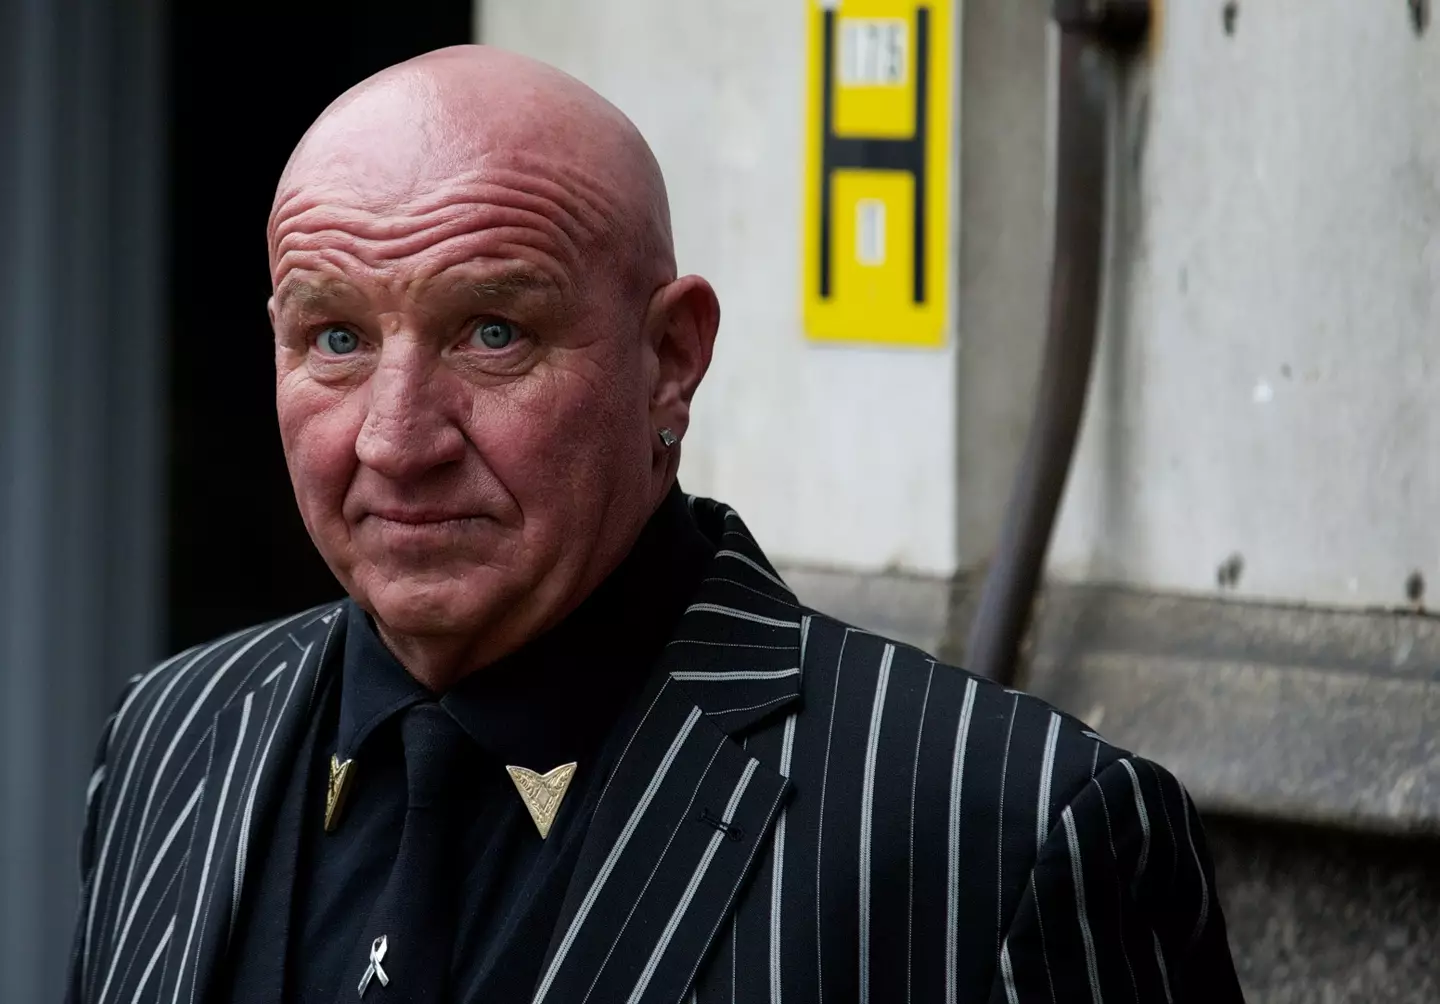 Dave Courtney was best known for being an East End gangster.